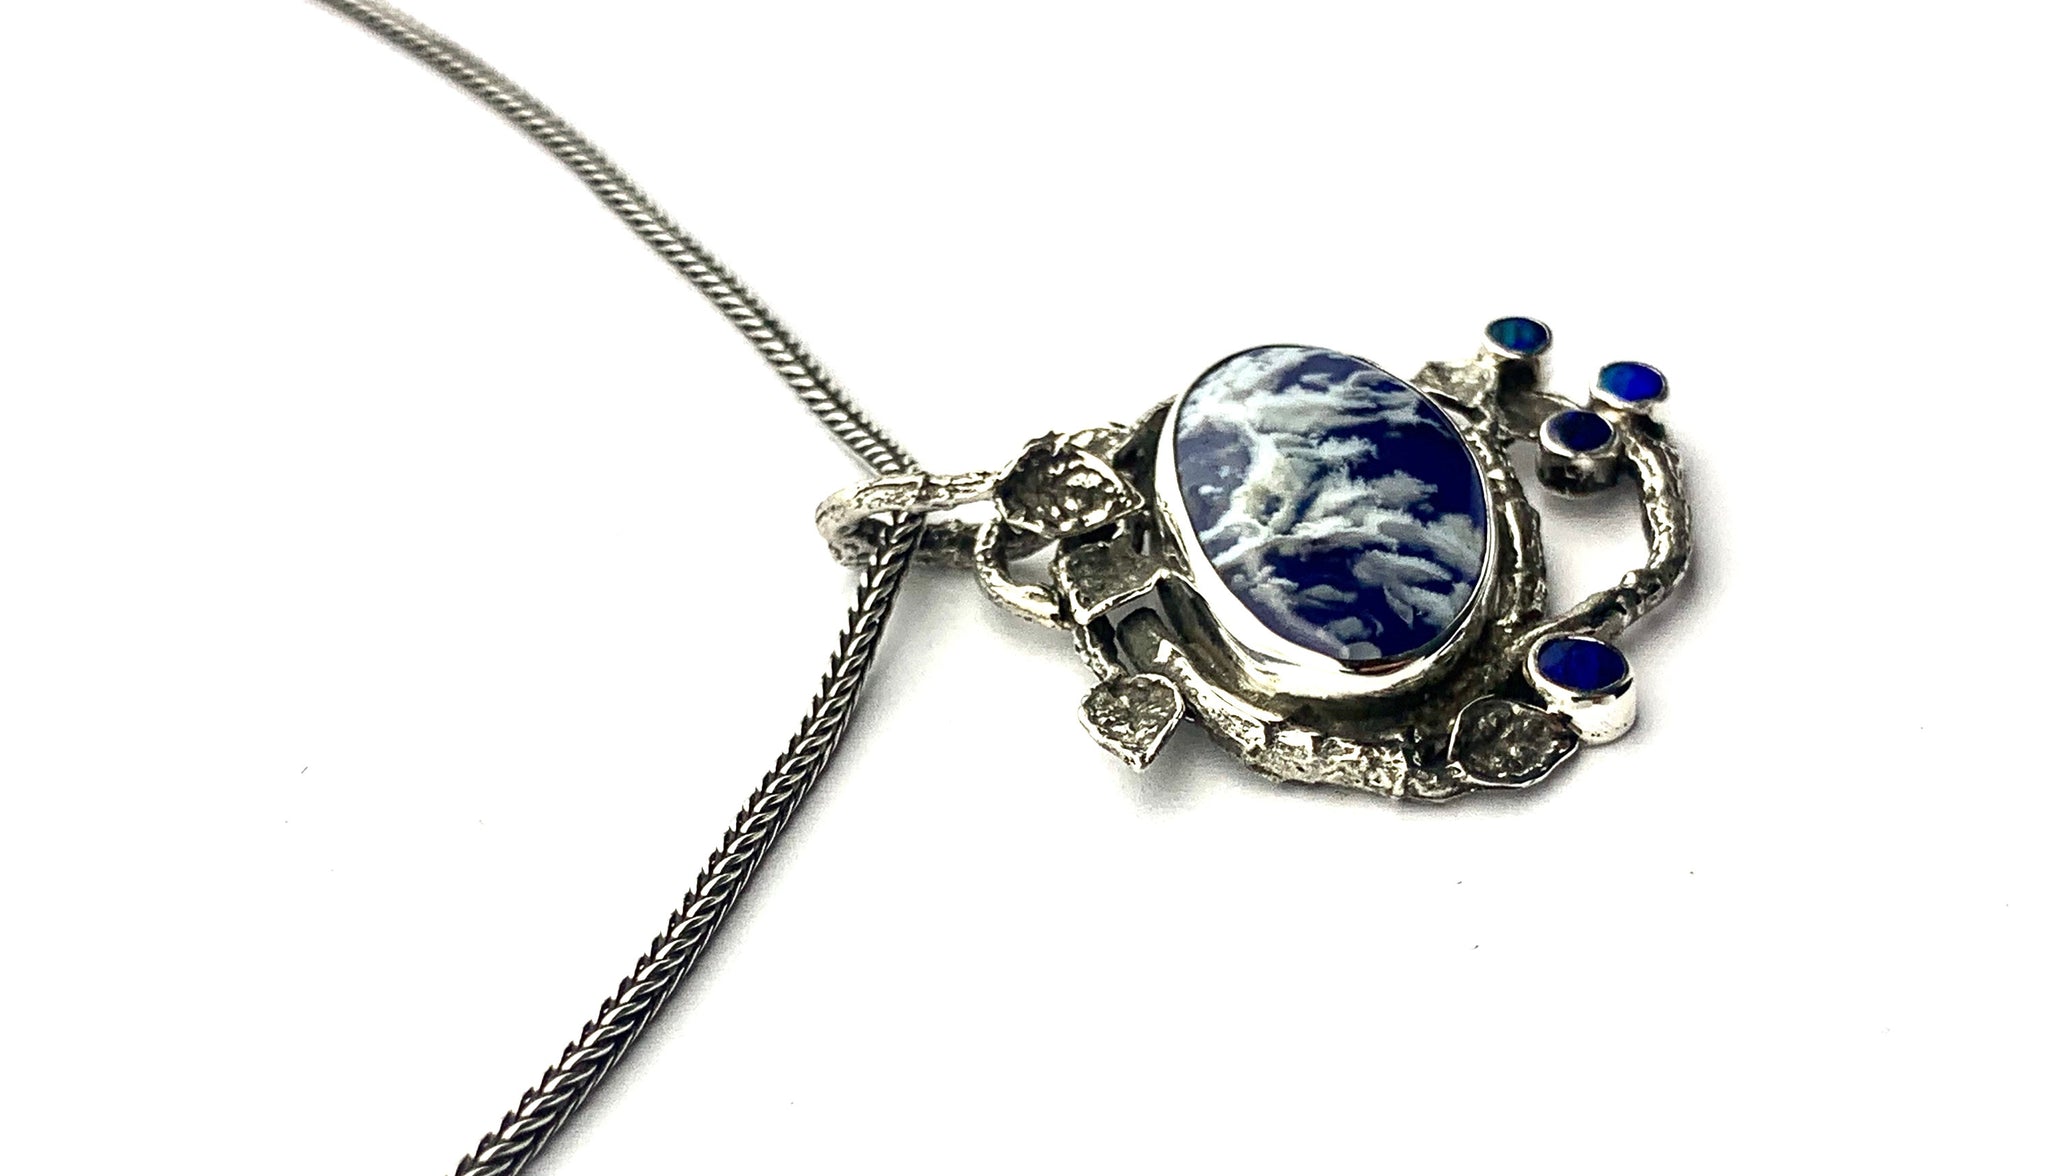 Lapis One of a Kind Necklace in Sterling Silver, Cloud Necklace with Australian Opals, Blue and White Necklace in Sterling Silver